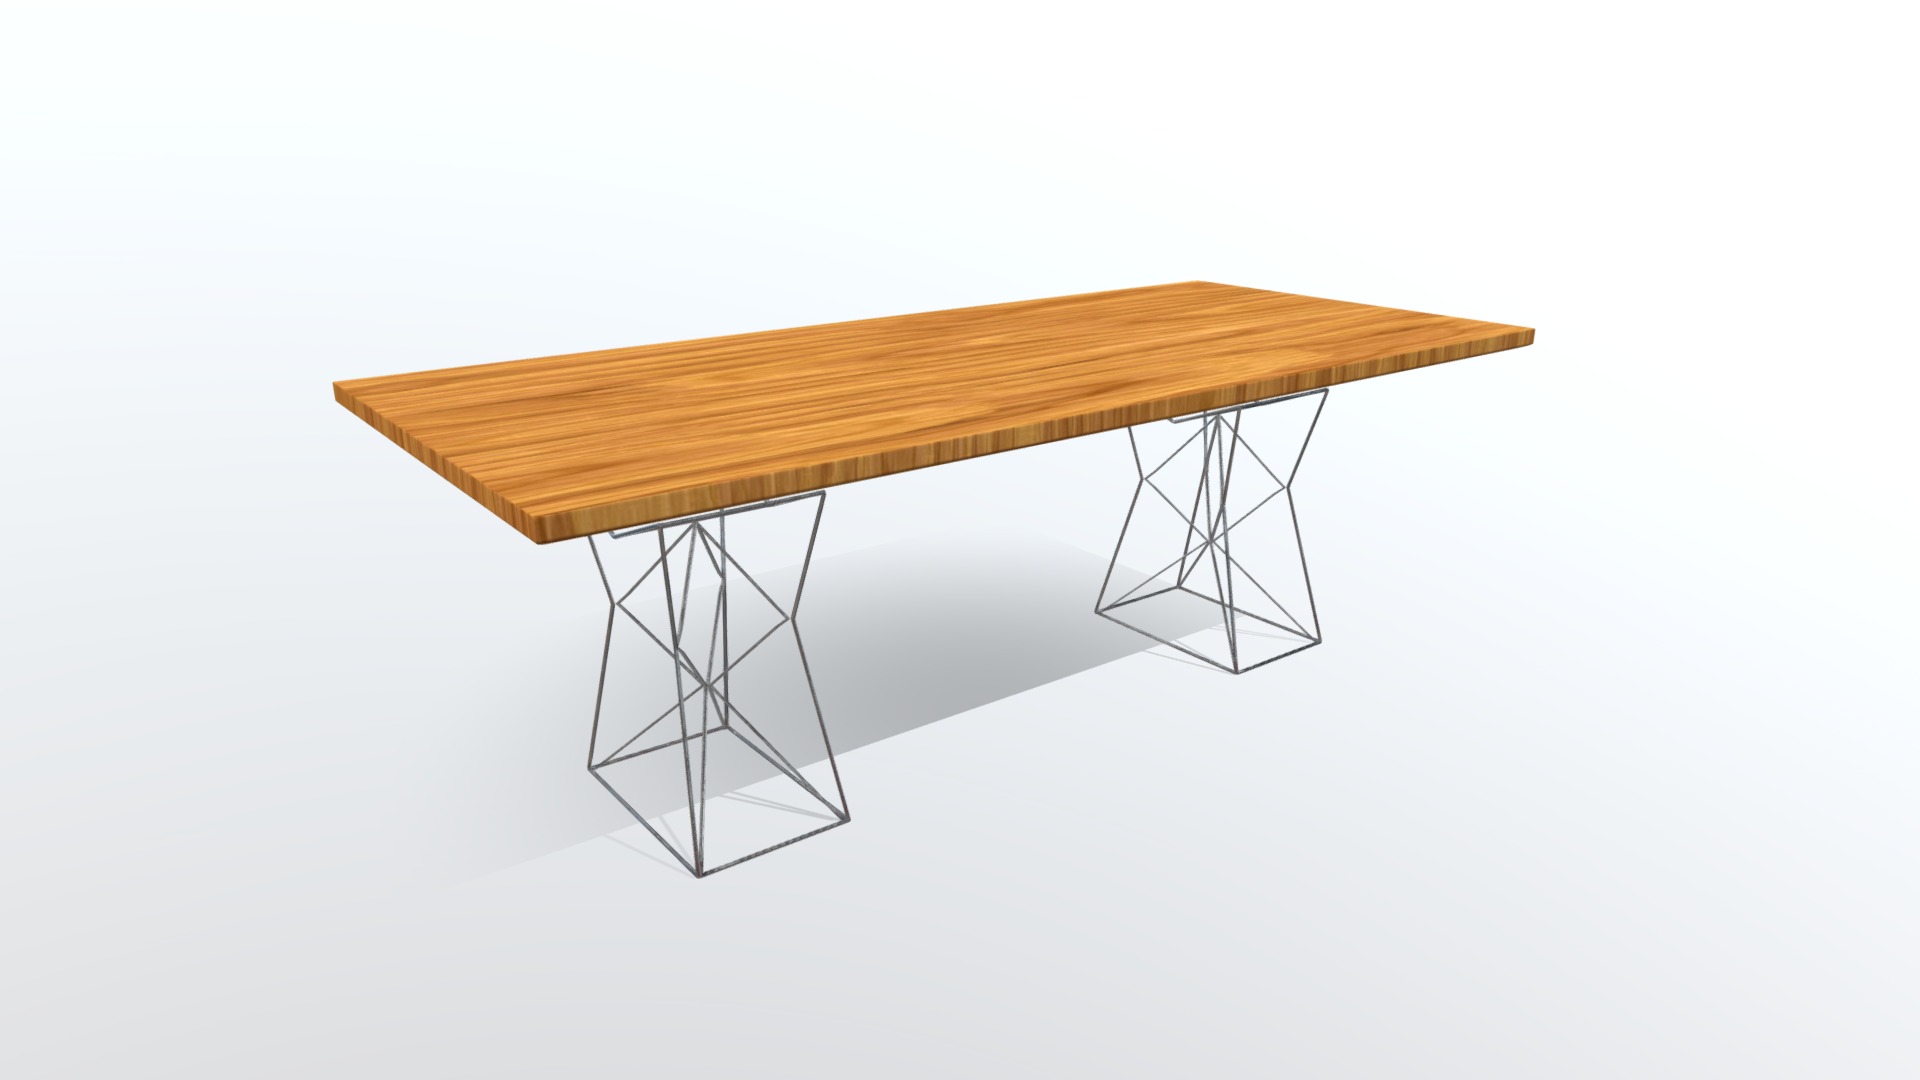 3D model Geometric Shape Wooden Table - This is a 3D model of the Geometric Shape Wooden Table. The 3D model is about a wooden table with legs.